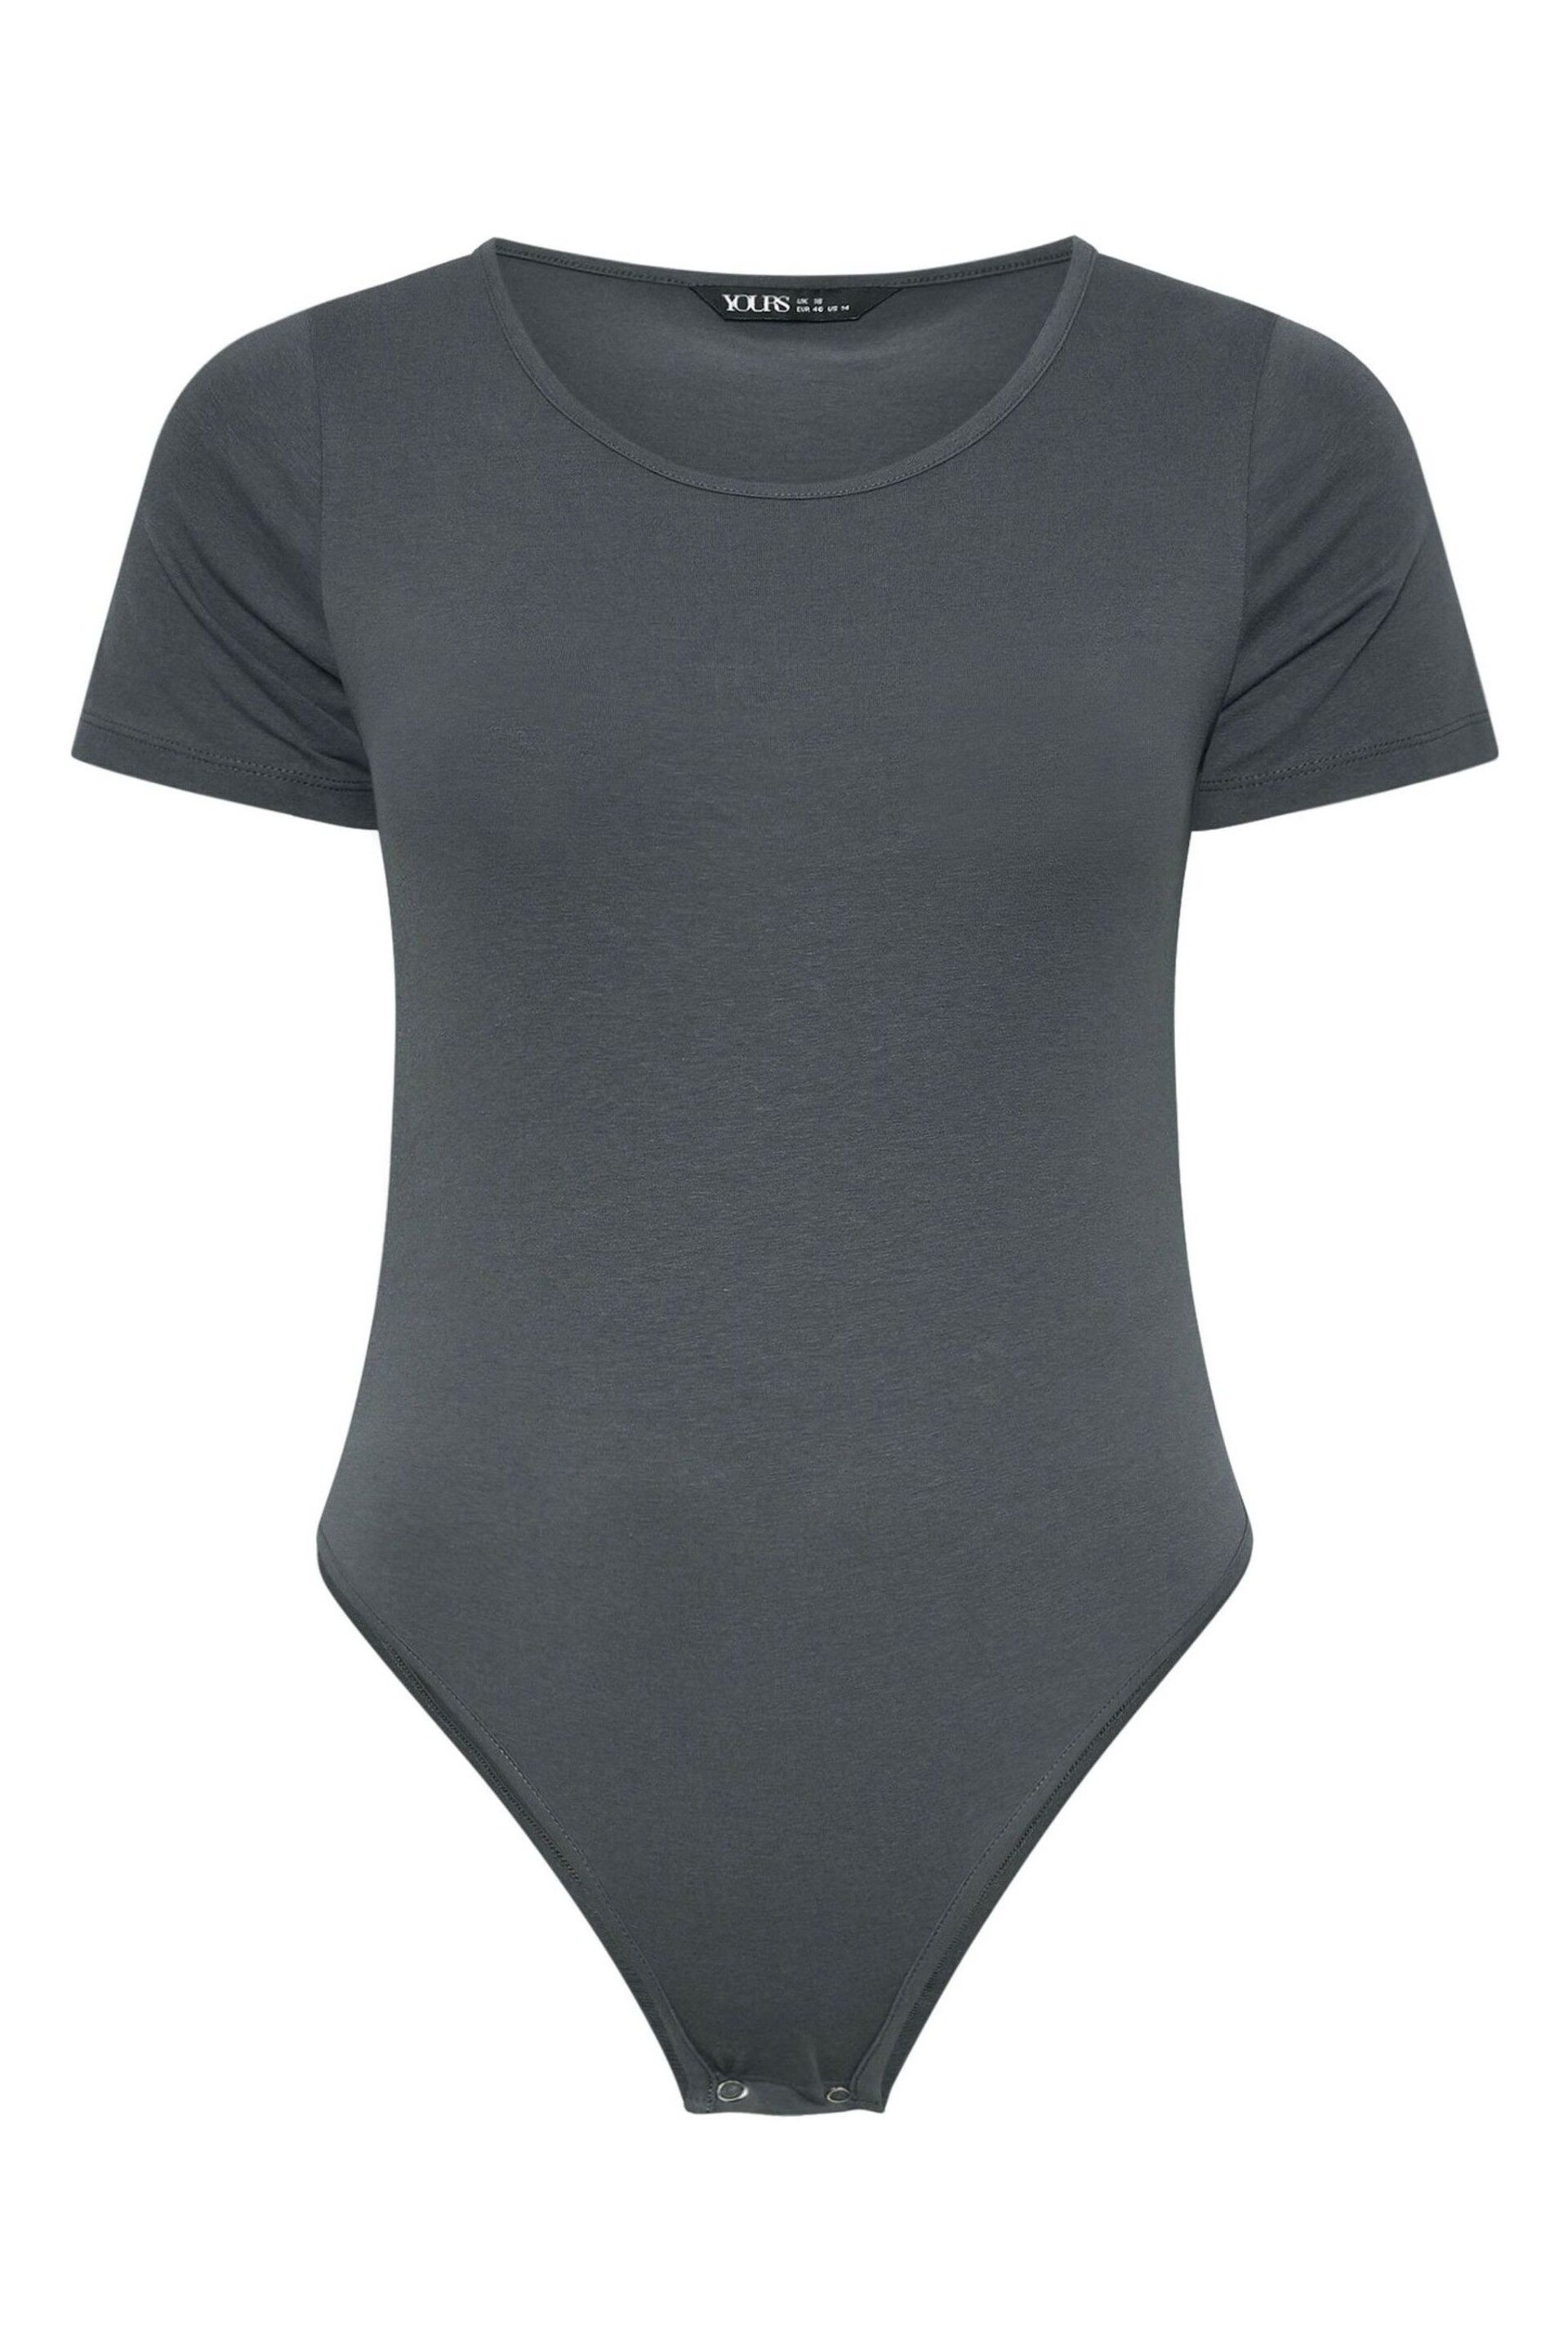 Yours Curve Grey Short Sleeve Body - Image 5 of 5